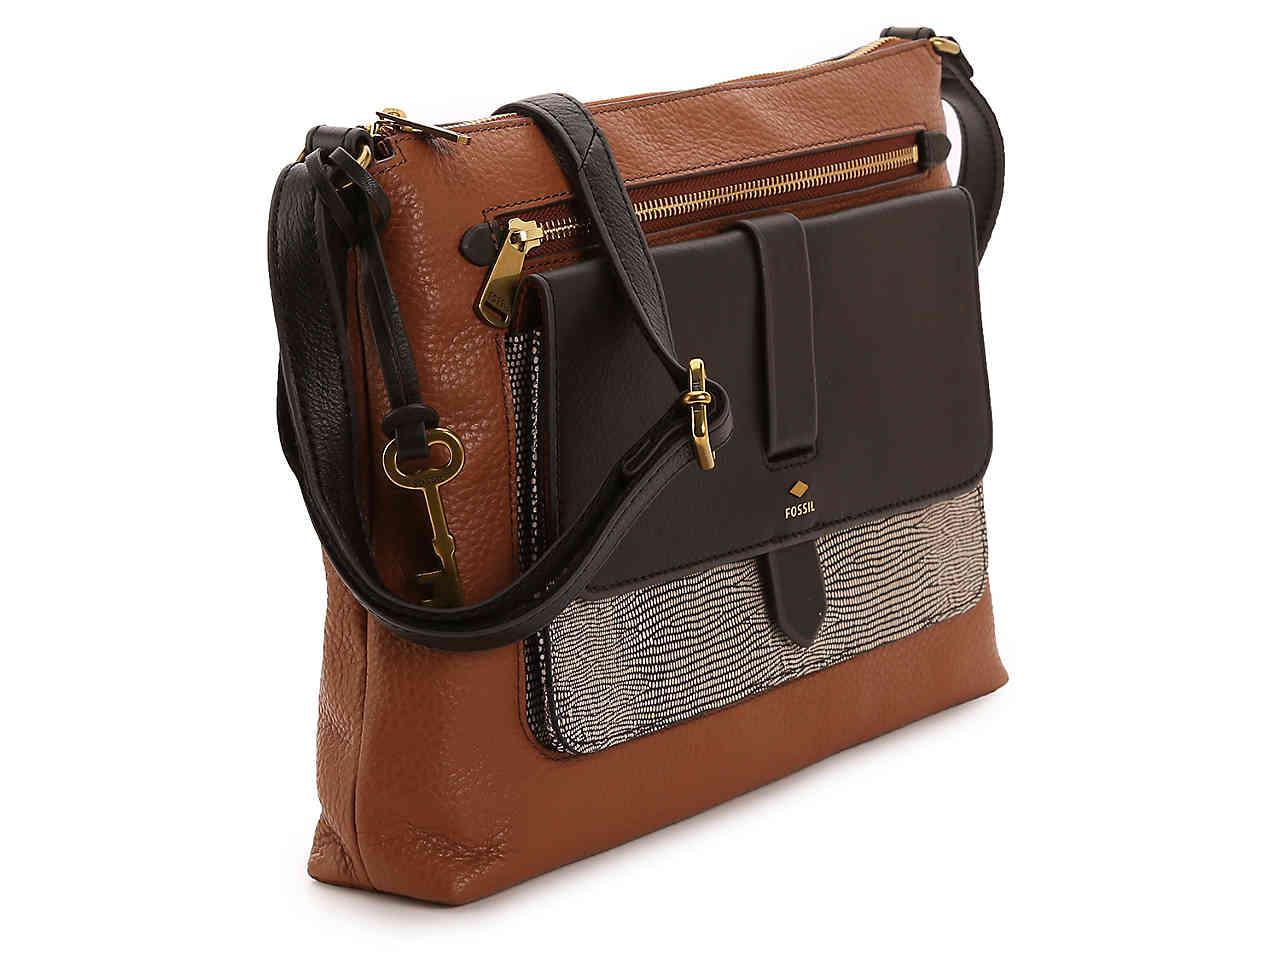 Fossil Kinley Leather Crossbody Bag in Black/White/Light Brown (Brown) - Lyst